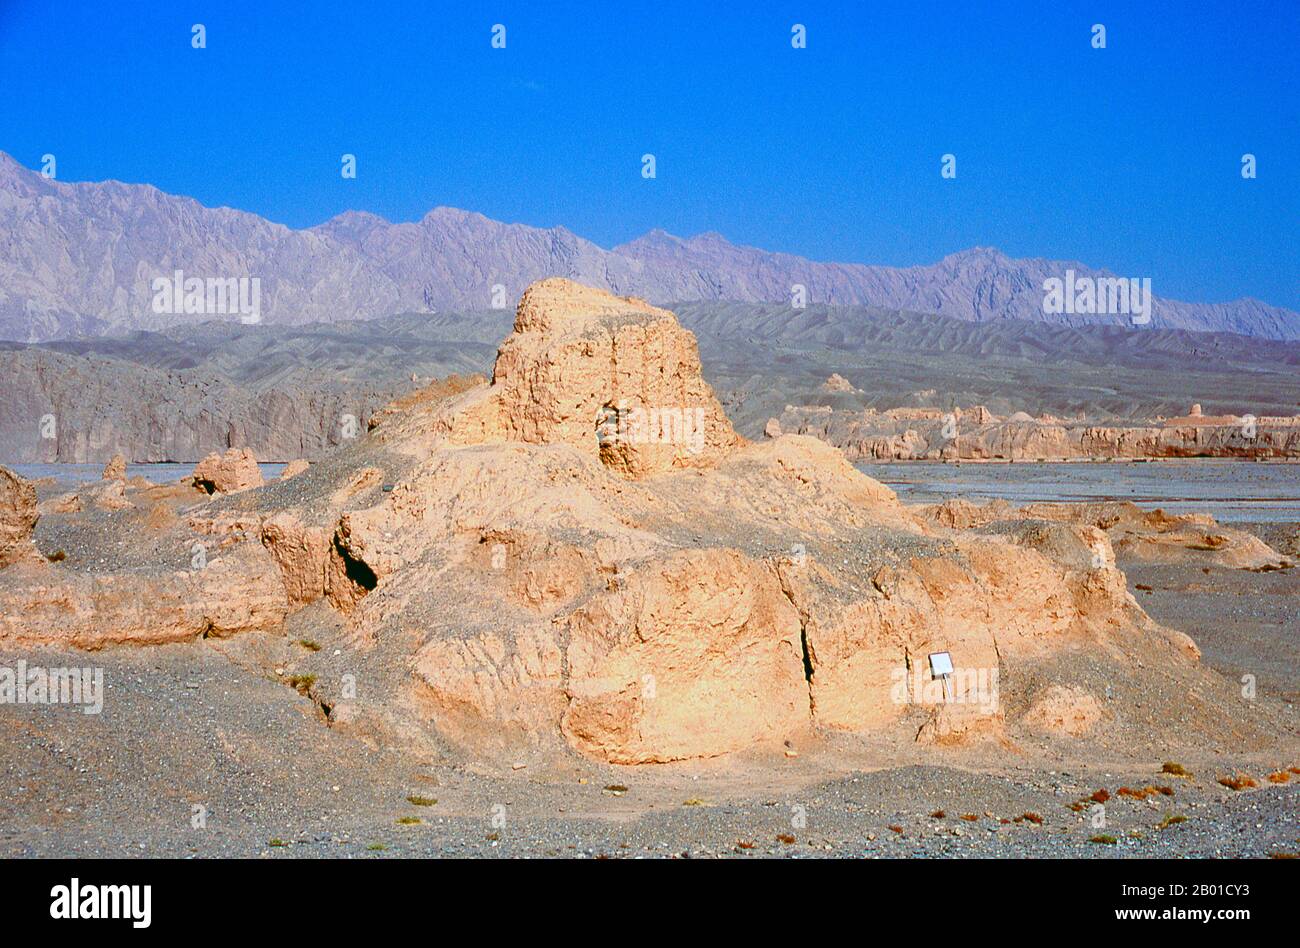 China: Remains of a chedi, Subashi Ancient City (Subashi Gucheng), Kuqa, Xinjiang Province.  The ruins of Subashi Gucheng (Subashi Ancient City) are all that is left of the ancient capital of the Kingdom of Qiuci that existed from the 4th century CE until it was abandoned sometime in the 12th century. Stock Photo